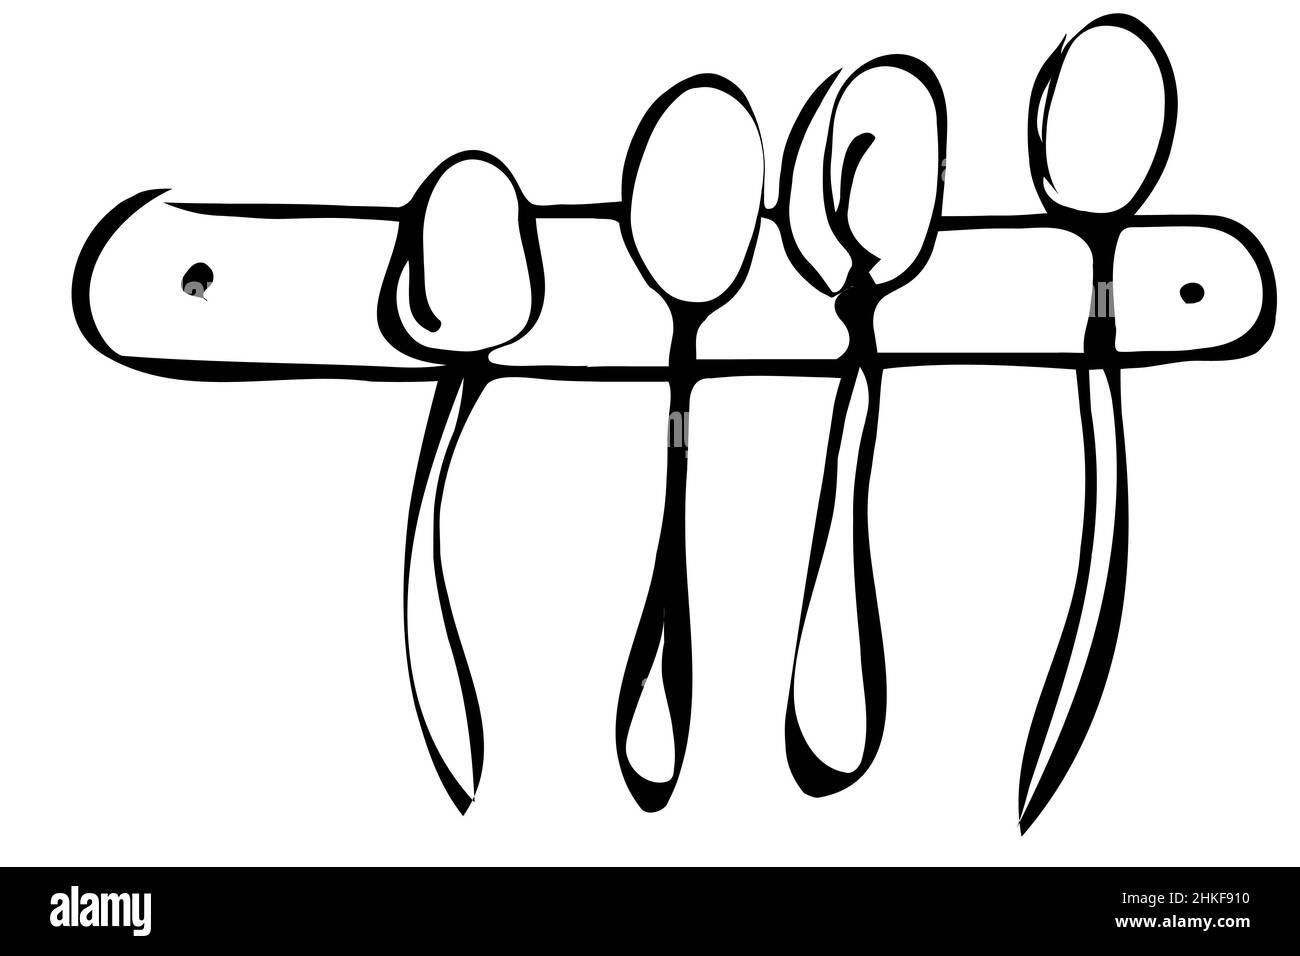 https://c8.alamy.com/comp/2HKF910/black-and-white-vector-sketch-of-a-set-of-large-spoons-hanging-on-the-wall-2HKF910.jpg